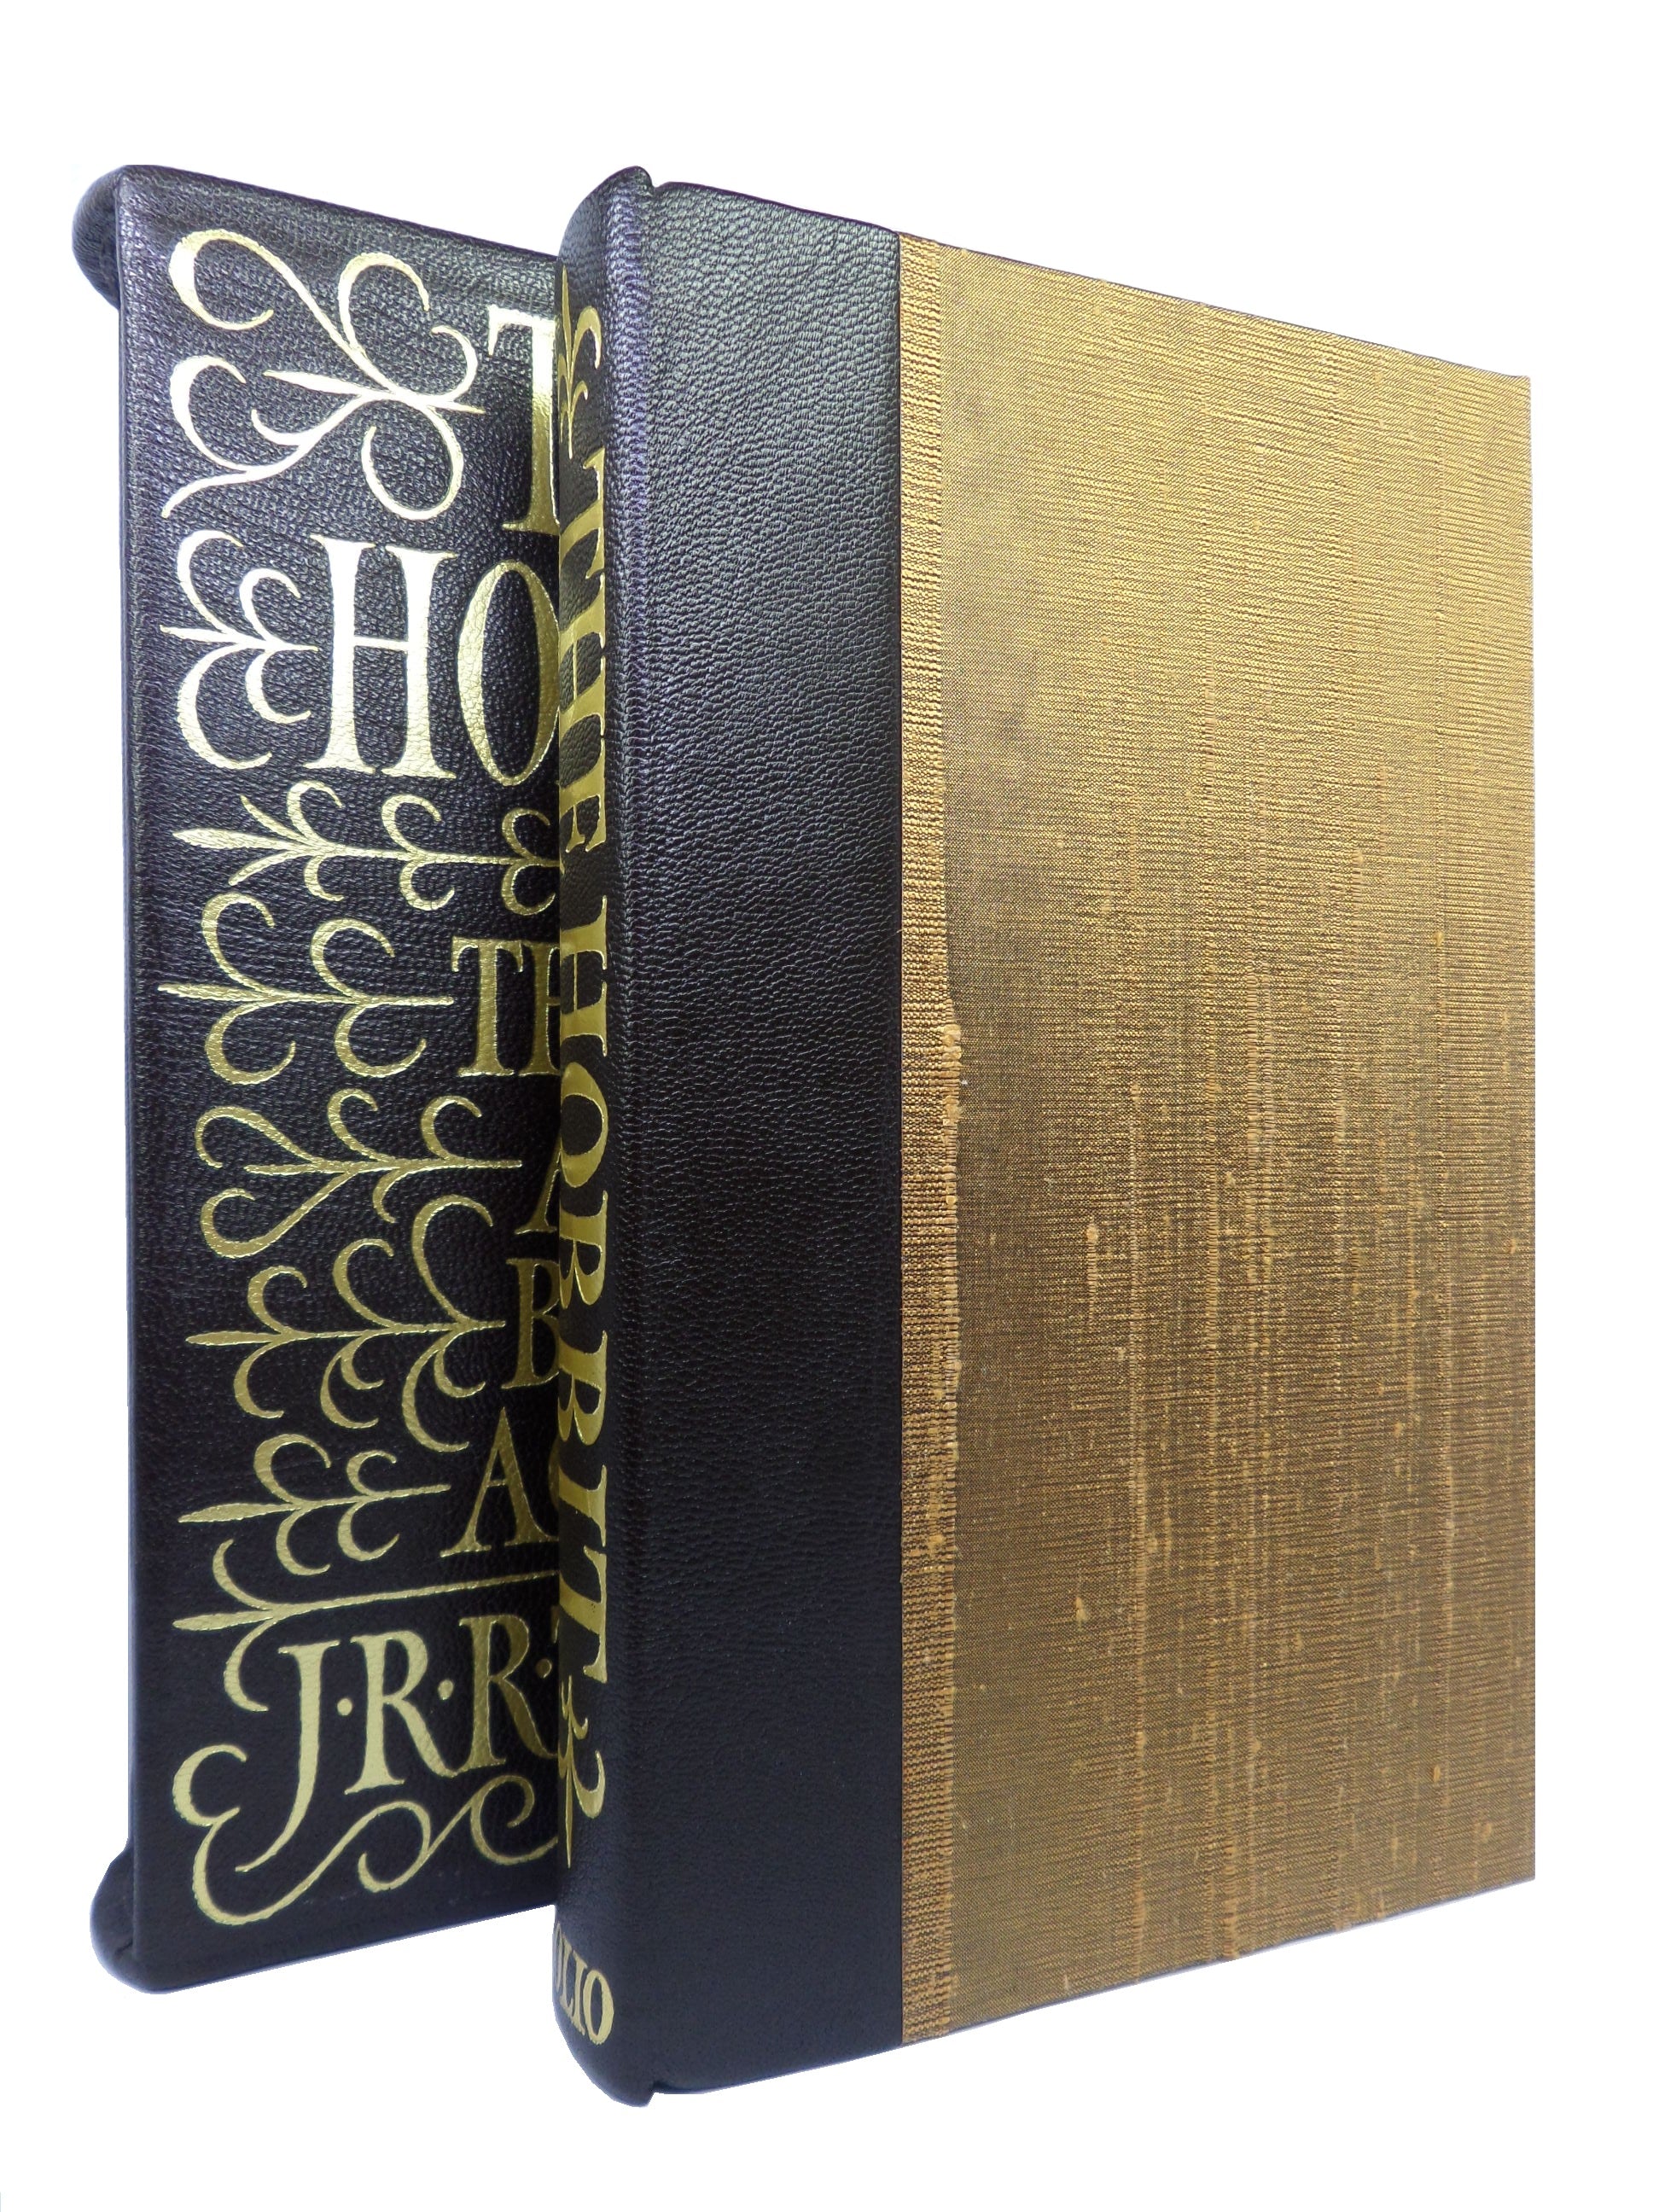 THE HOBBIT BY J.R.R. TOLKIEN 2002 FOLIO SOCIETY DELUXE EDITION